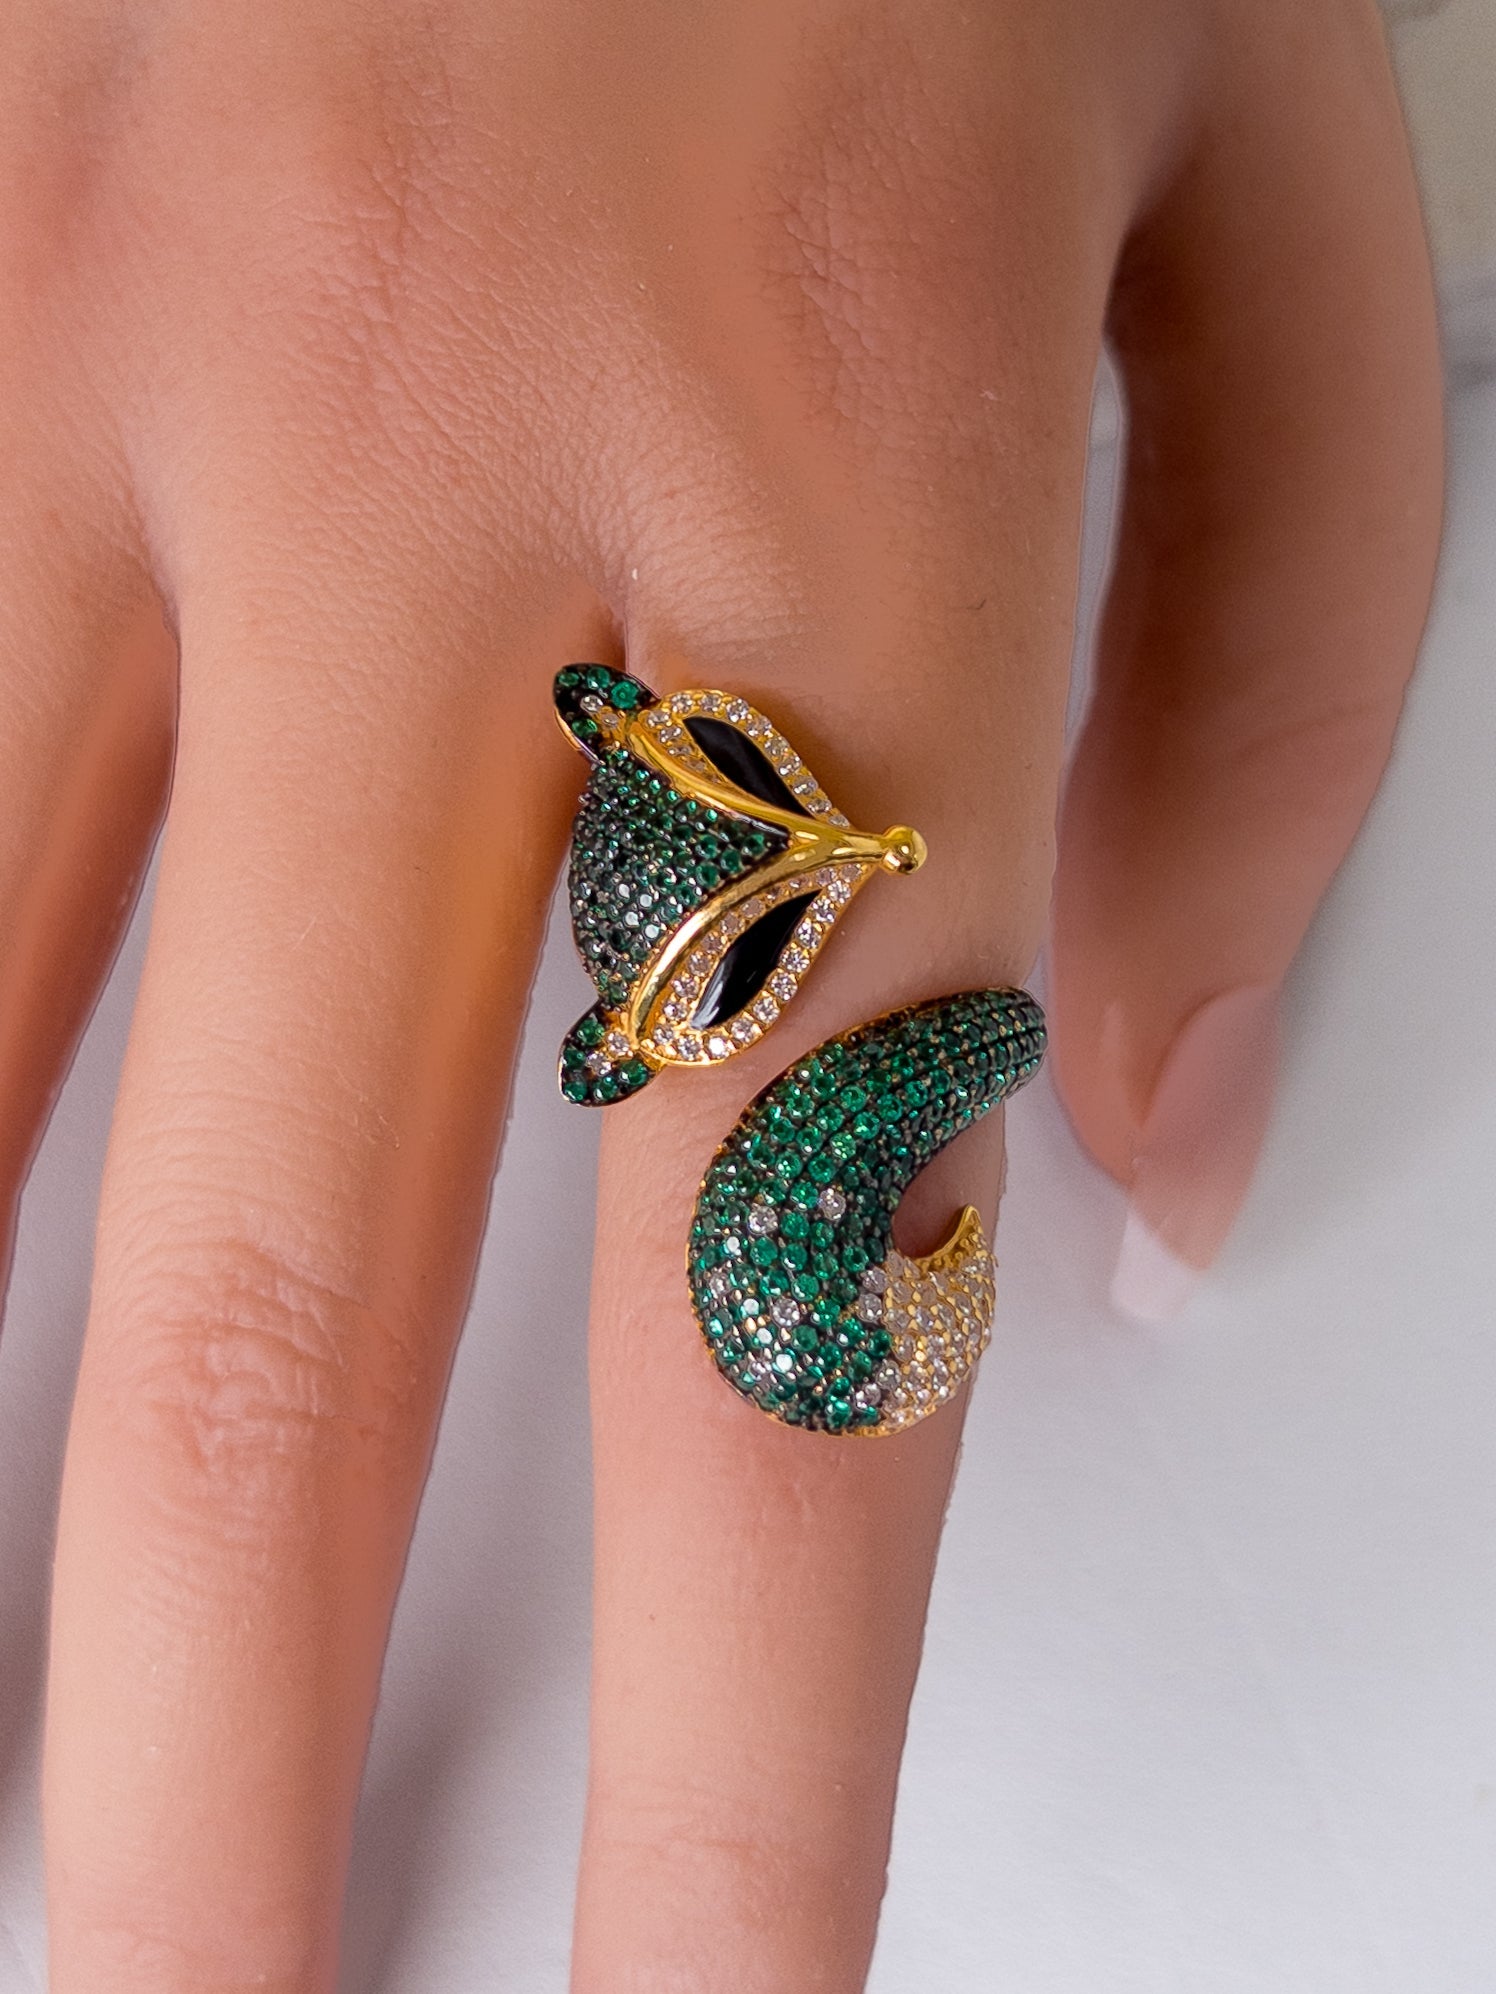 21k Gold Ring - Fox Collection - Cleopatra Jewelers